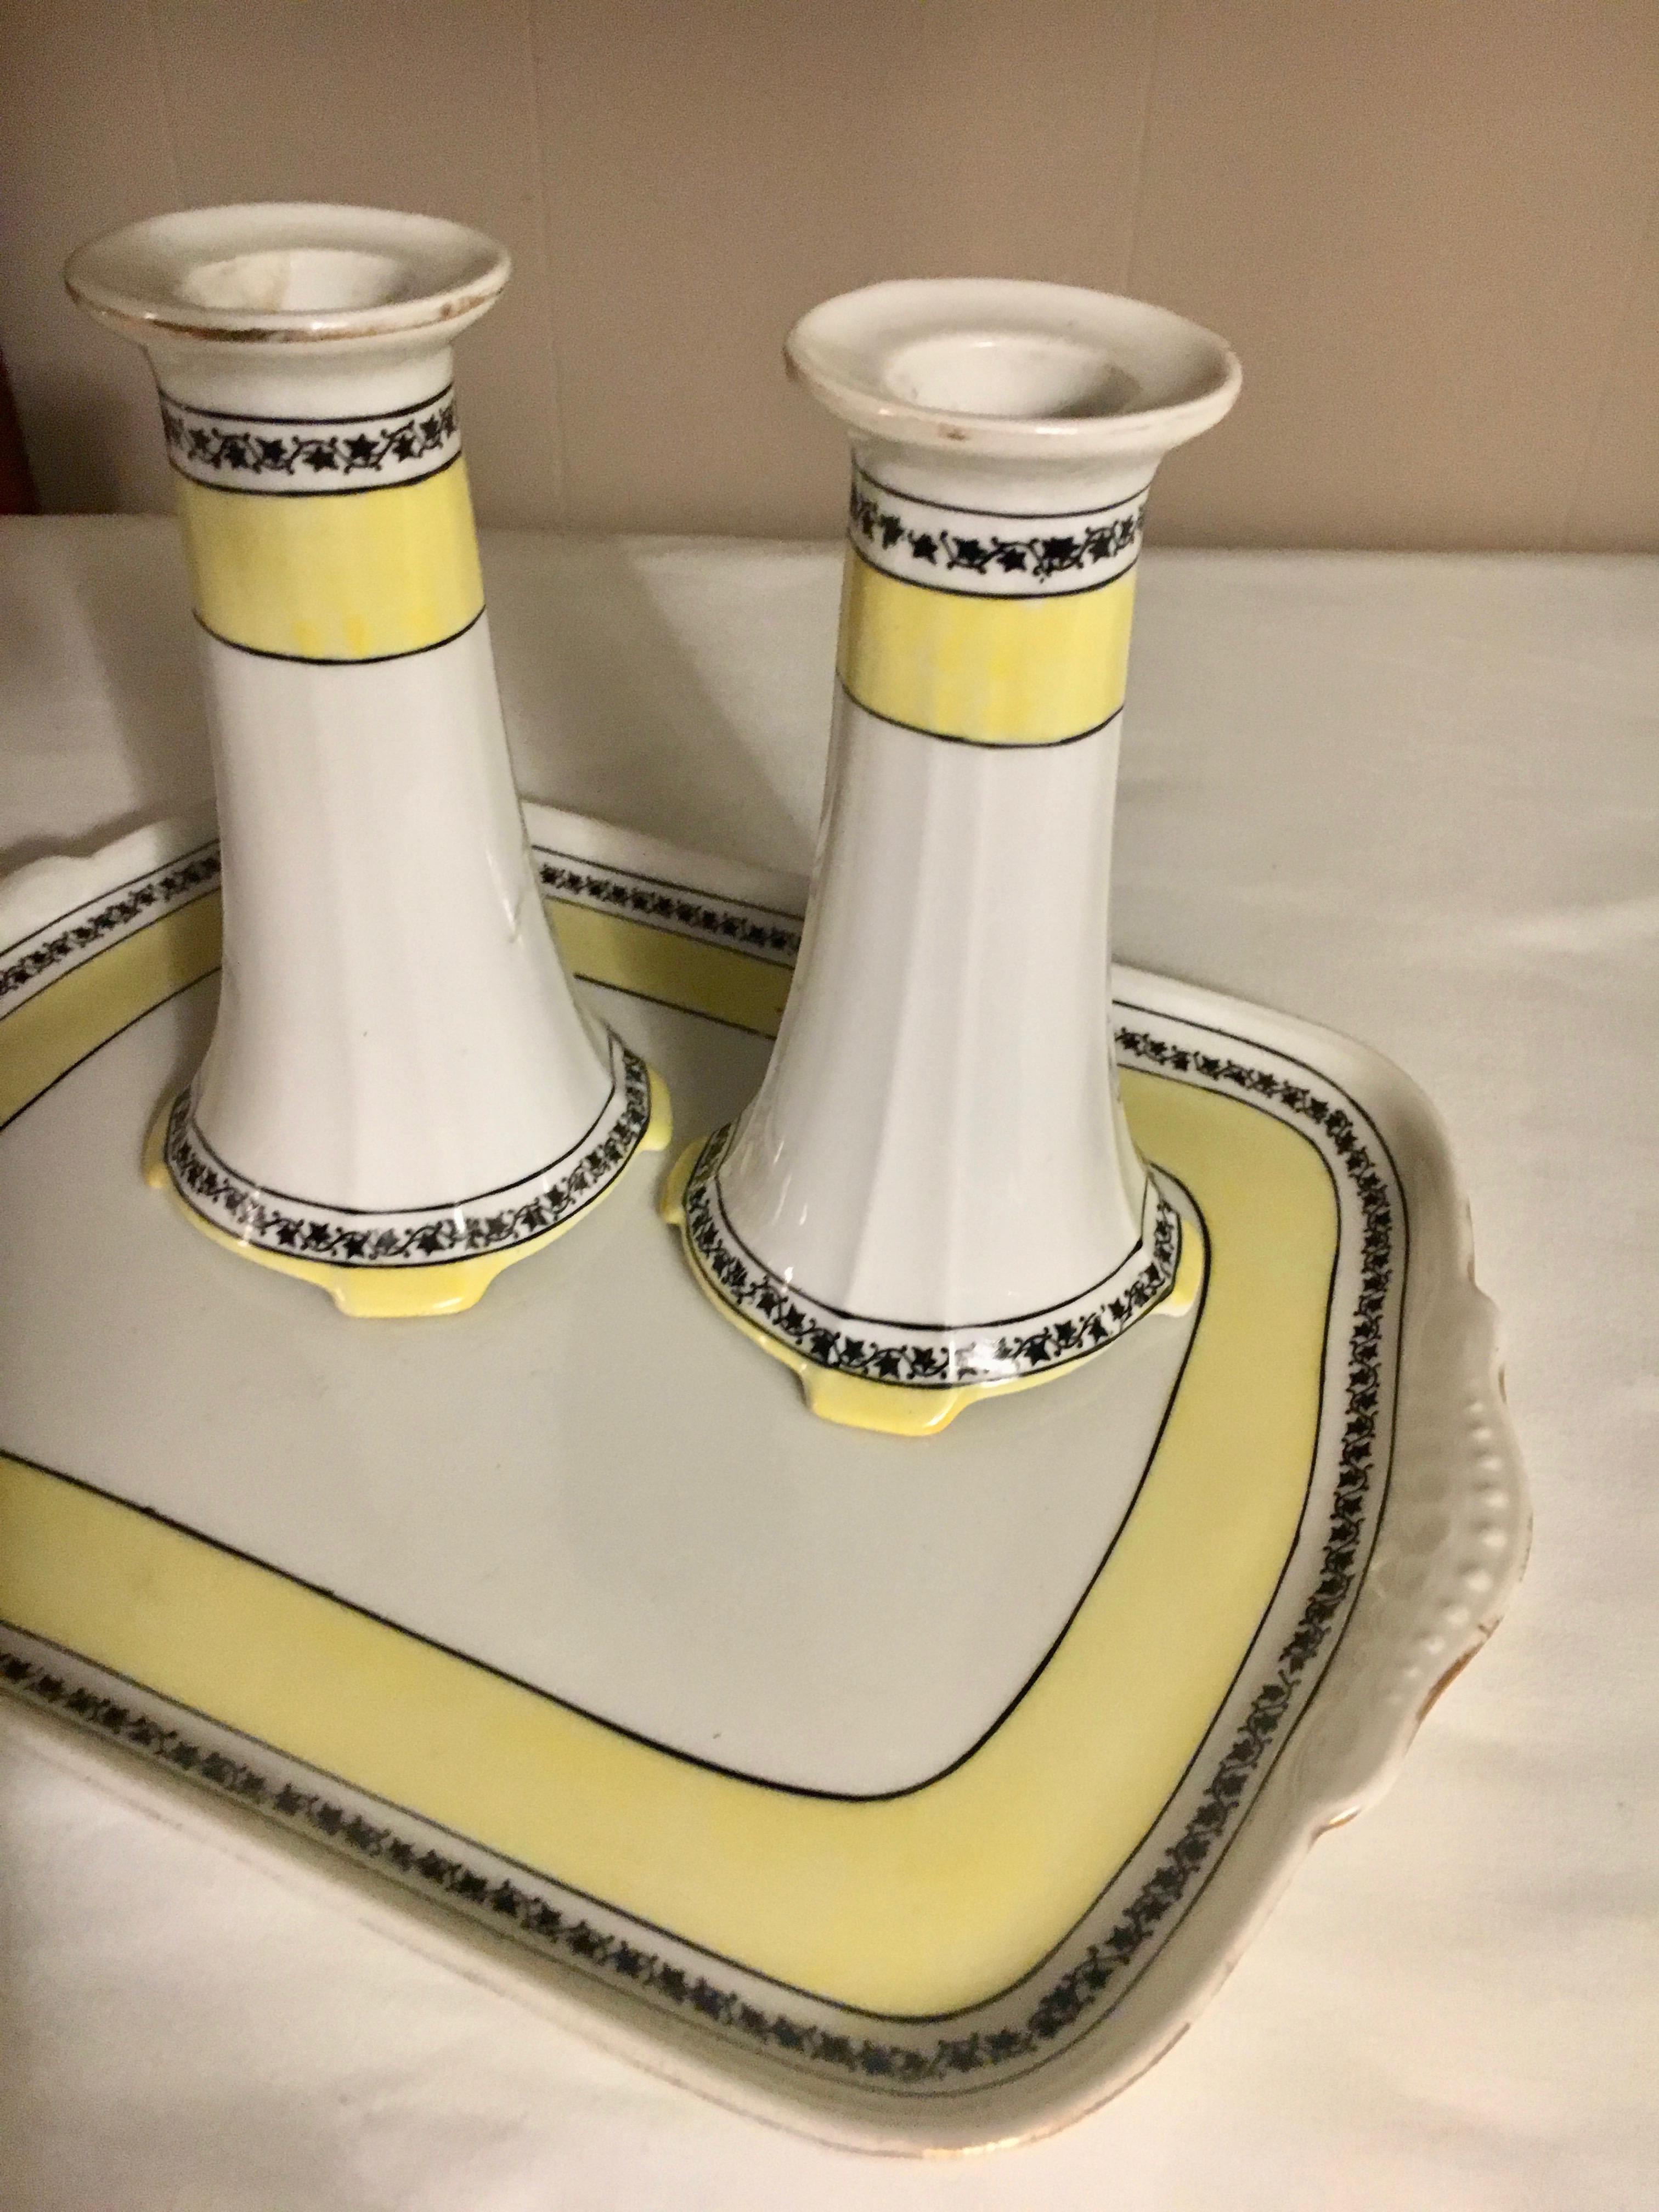 Union Bavaria Porcelain Tray and Candlesticks For Sale 5